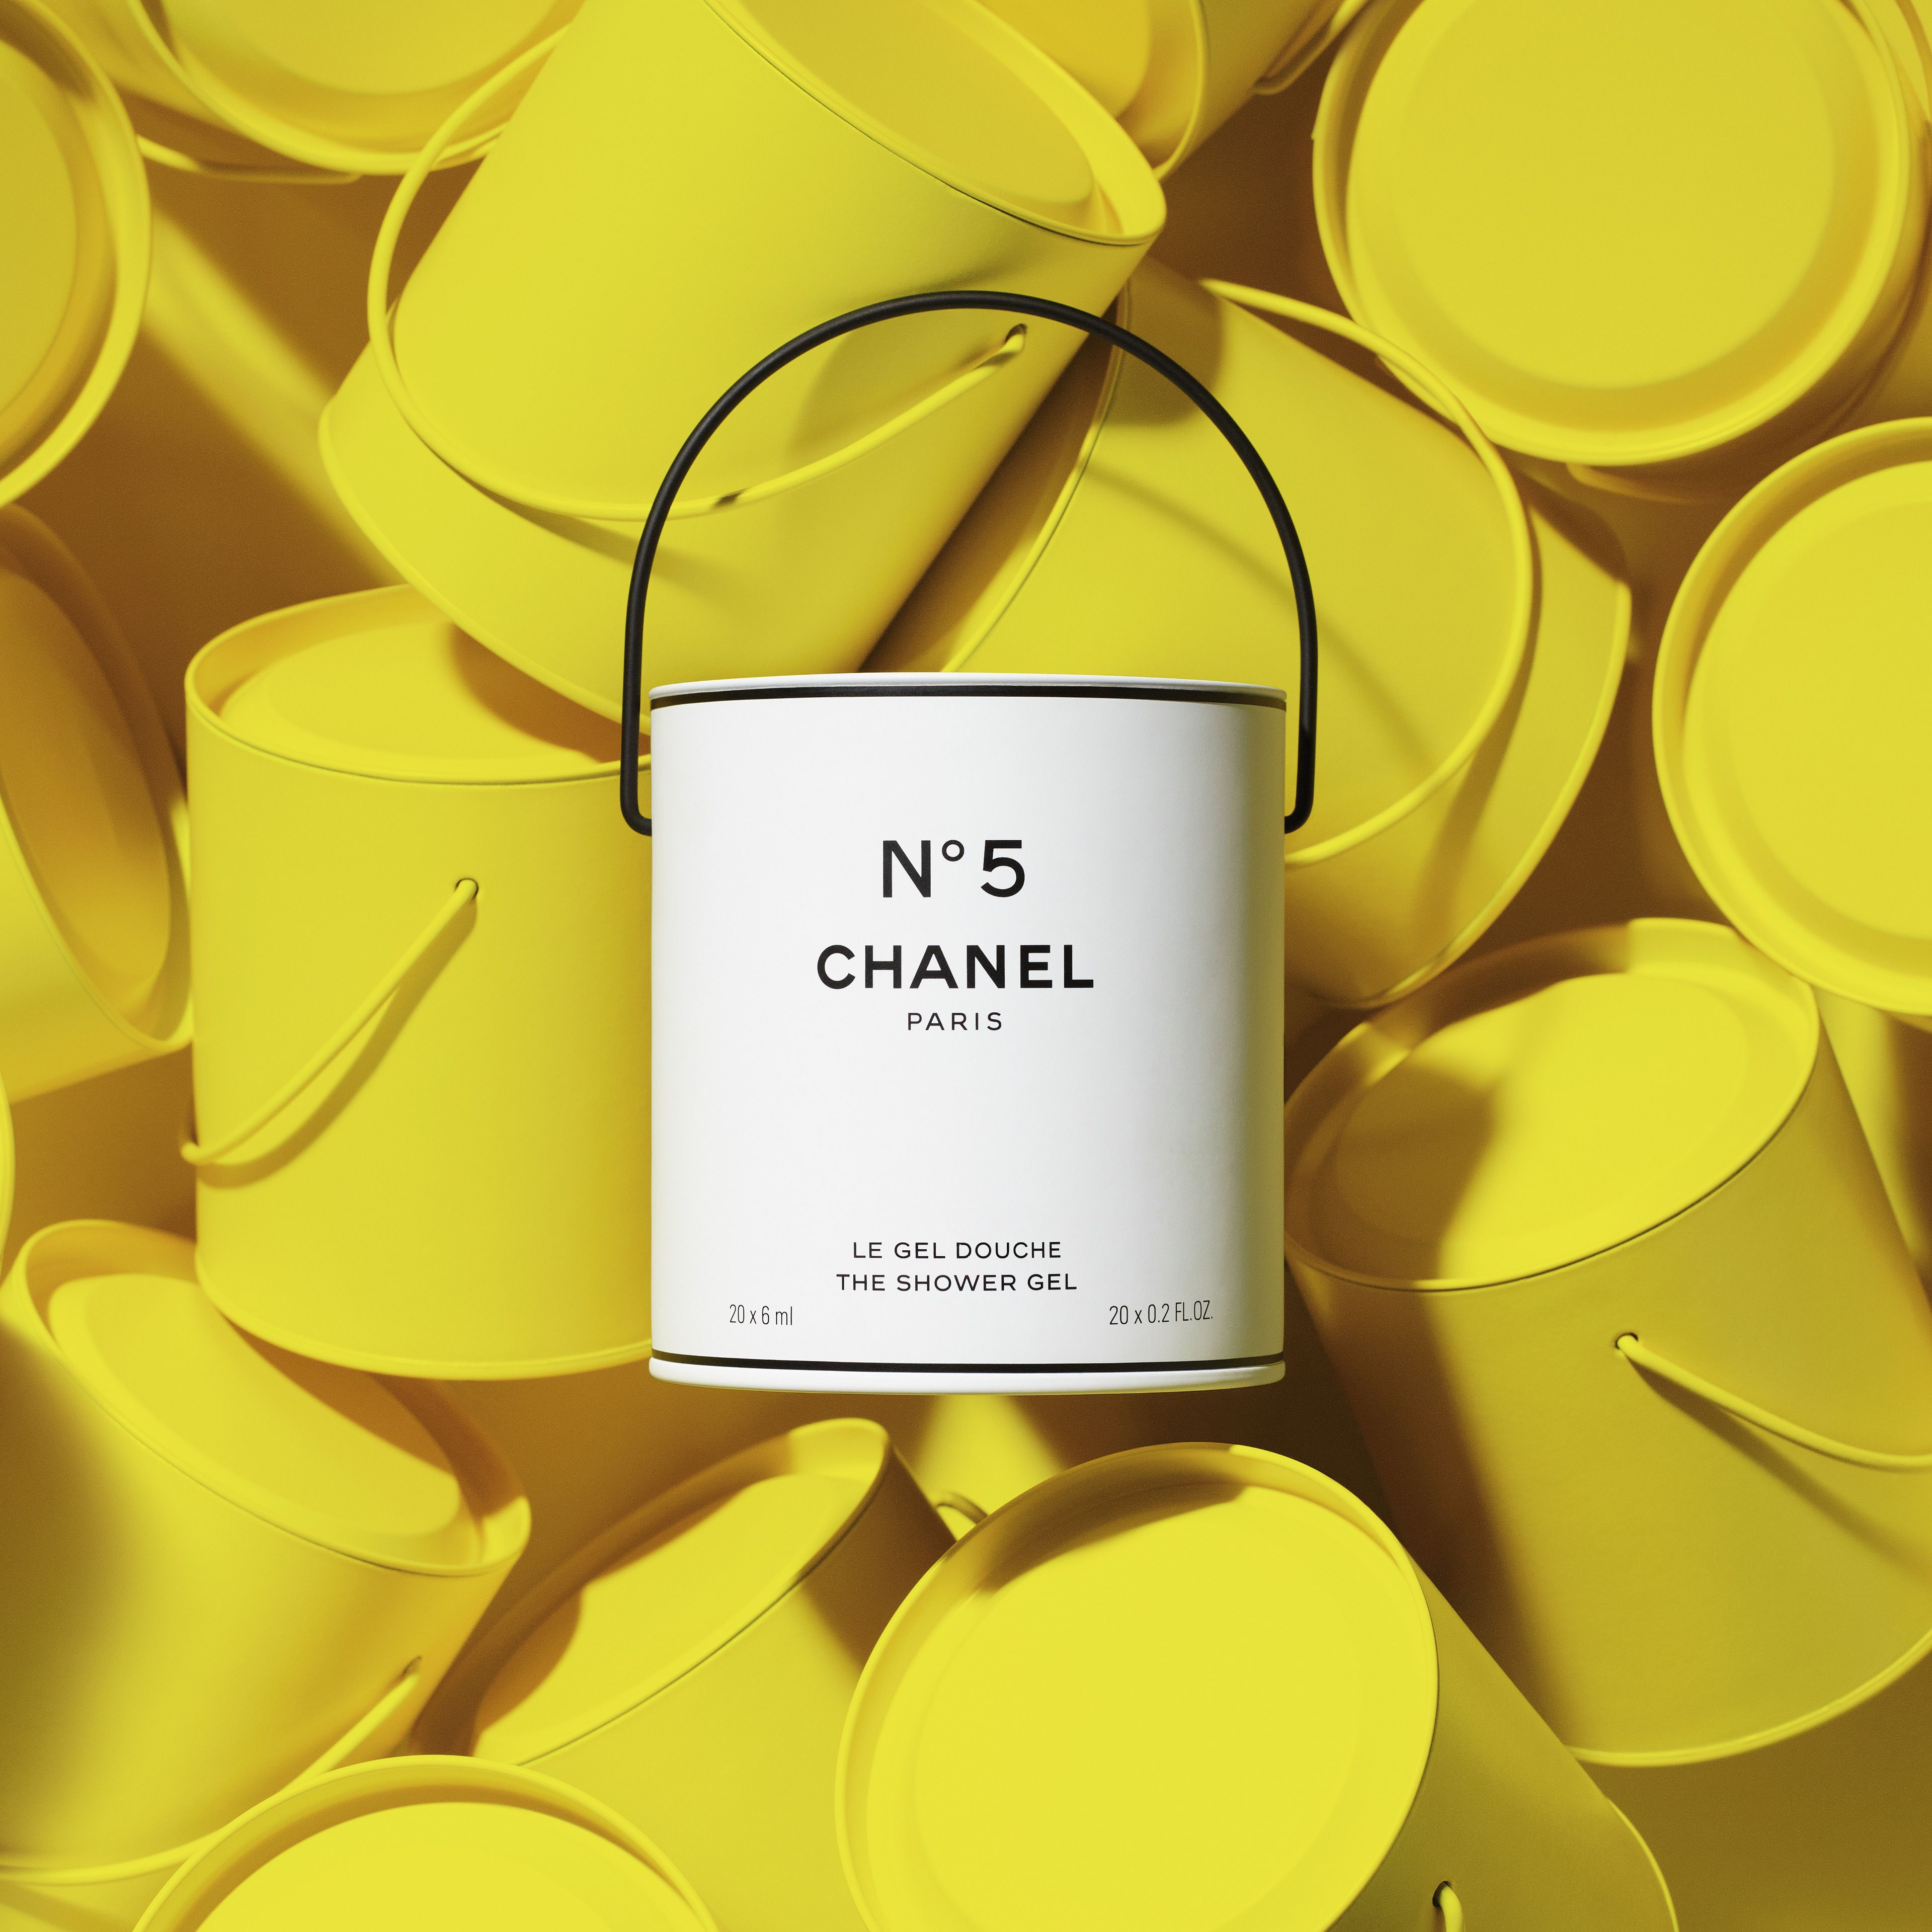 Chanel steps back in time to celebrate 100 years of Nº5